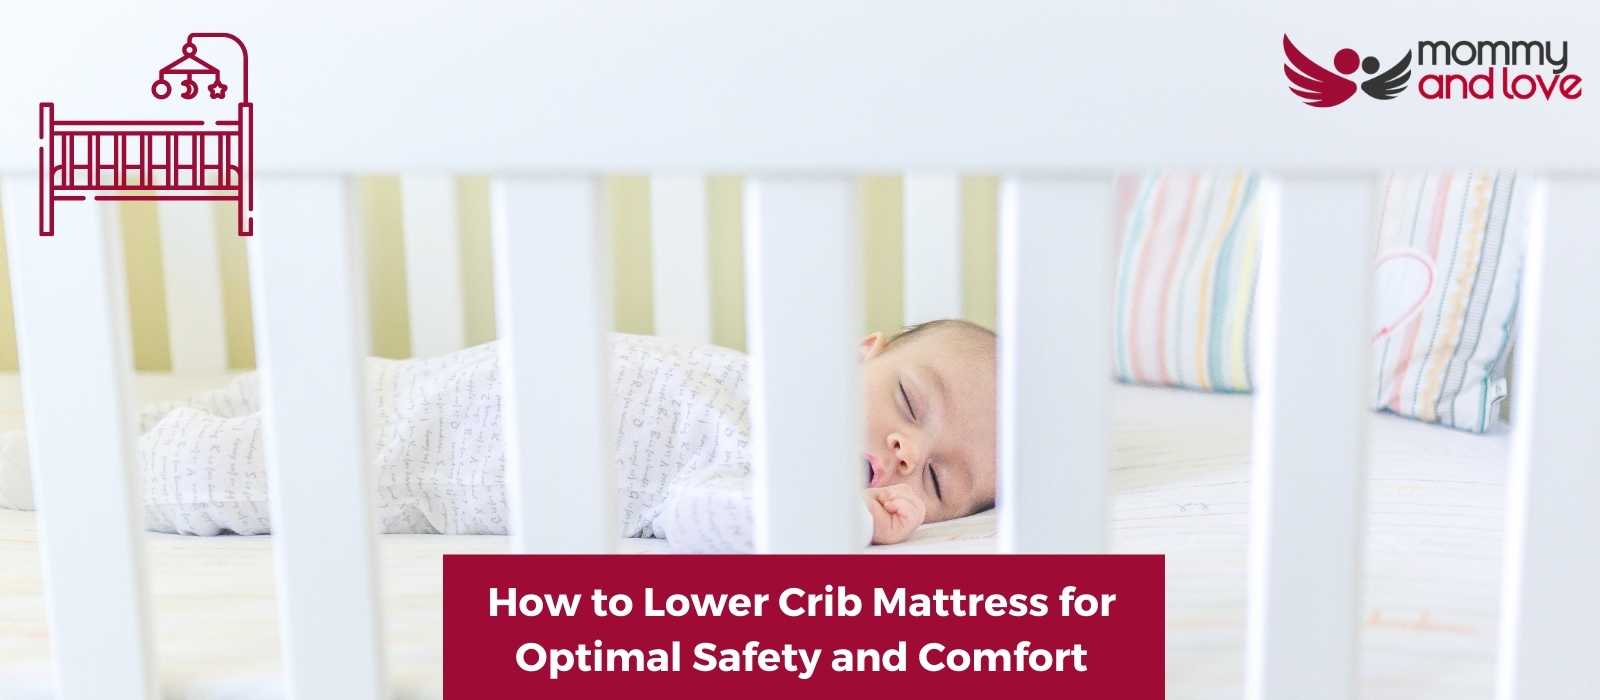 recommended number of coils for crib mattress